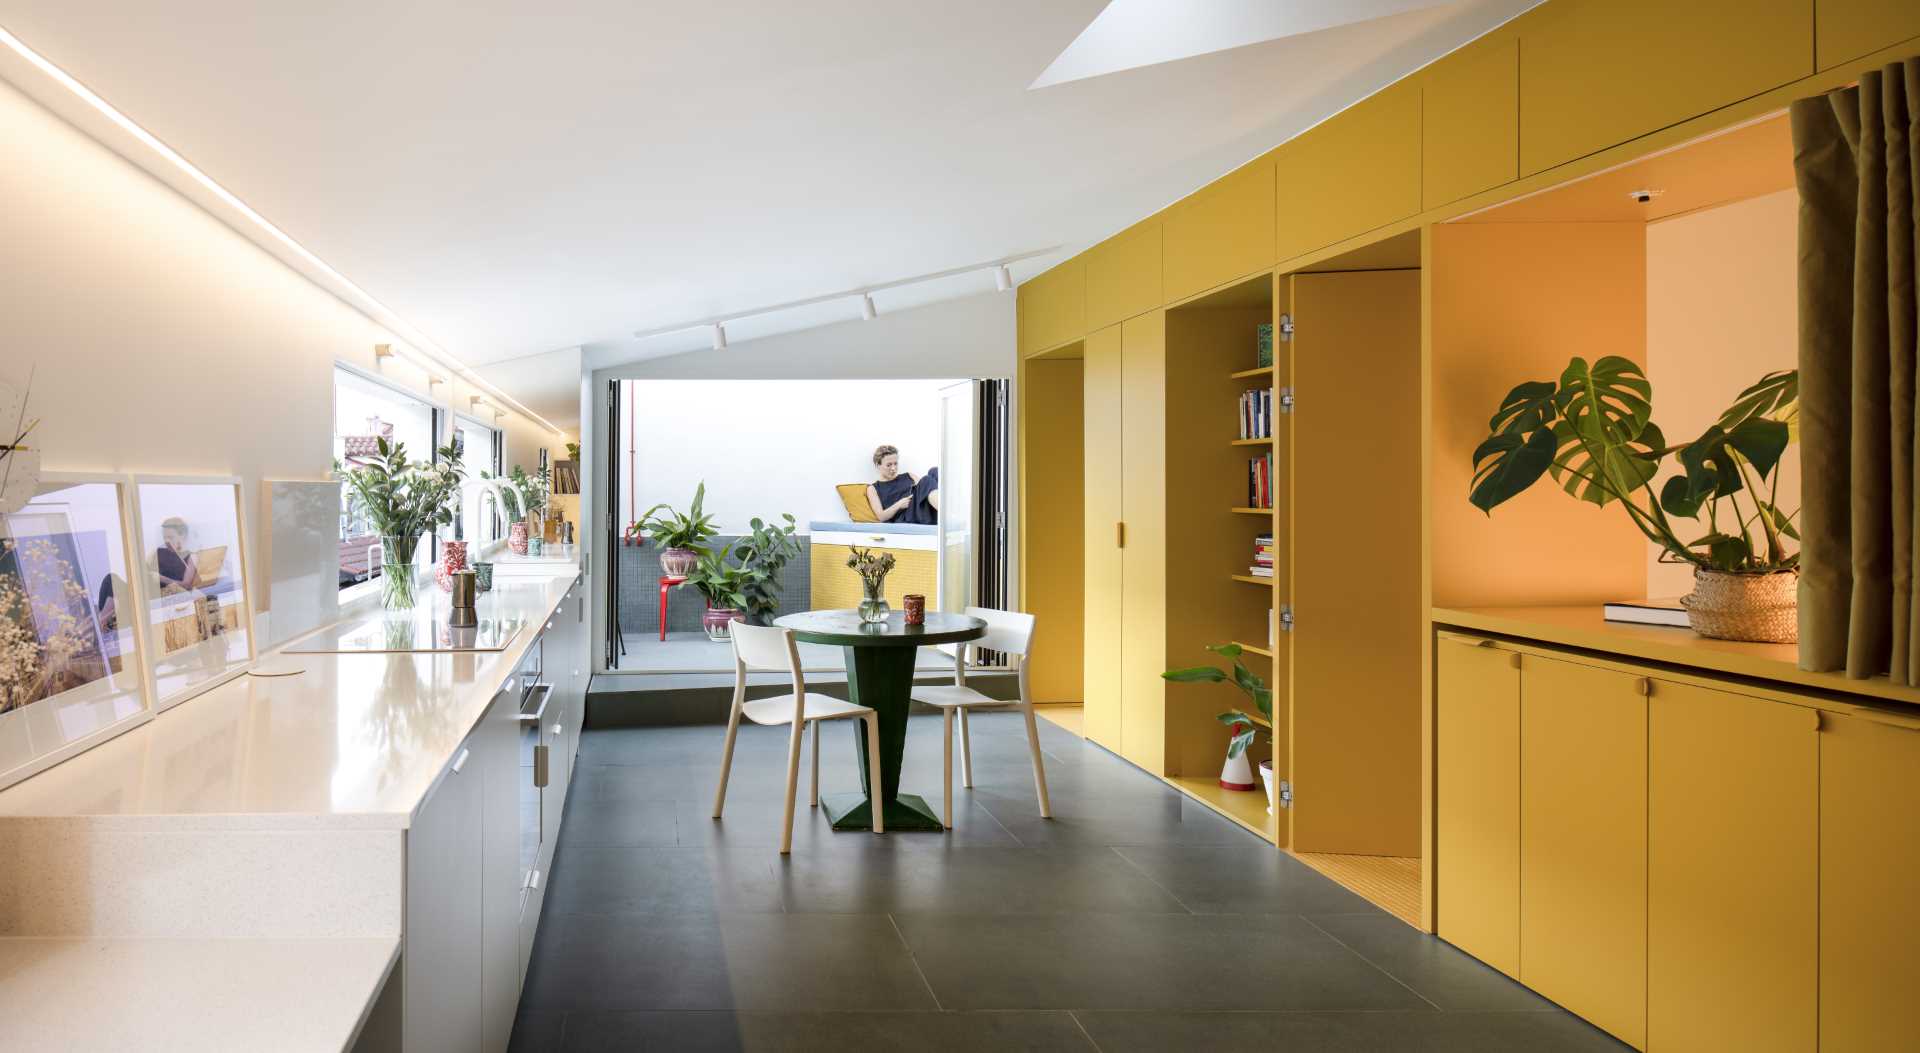 A small apartment with a yellow accent wall that includes plenty of storage and hides the bedroom and bathroom.